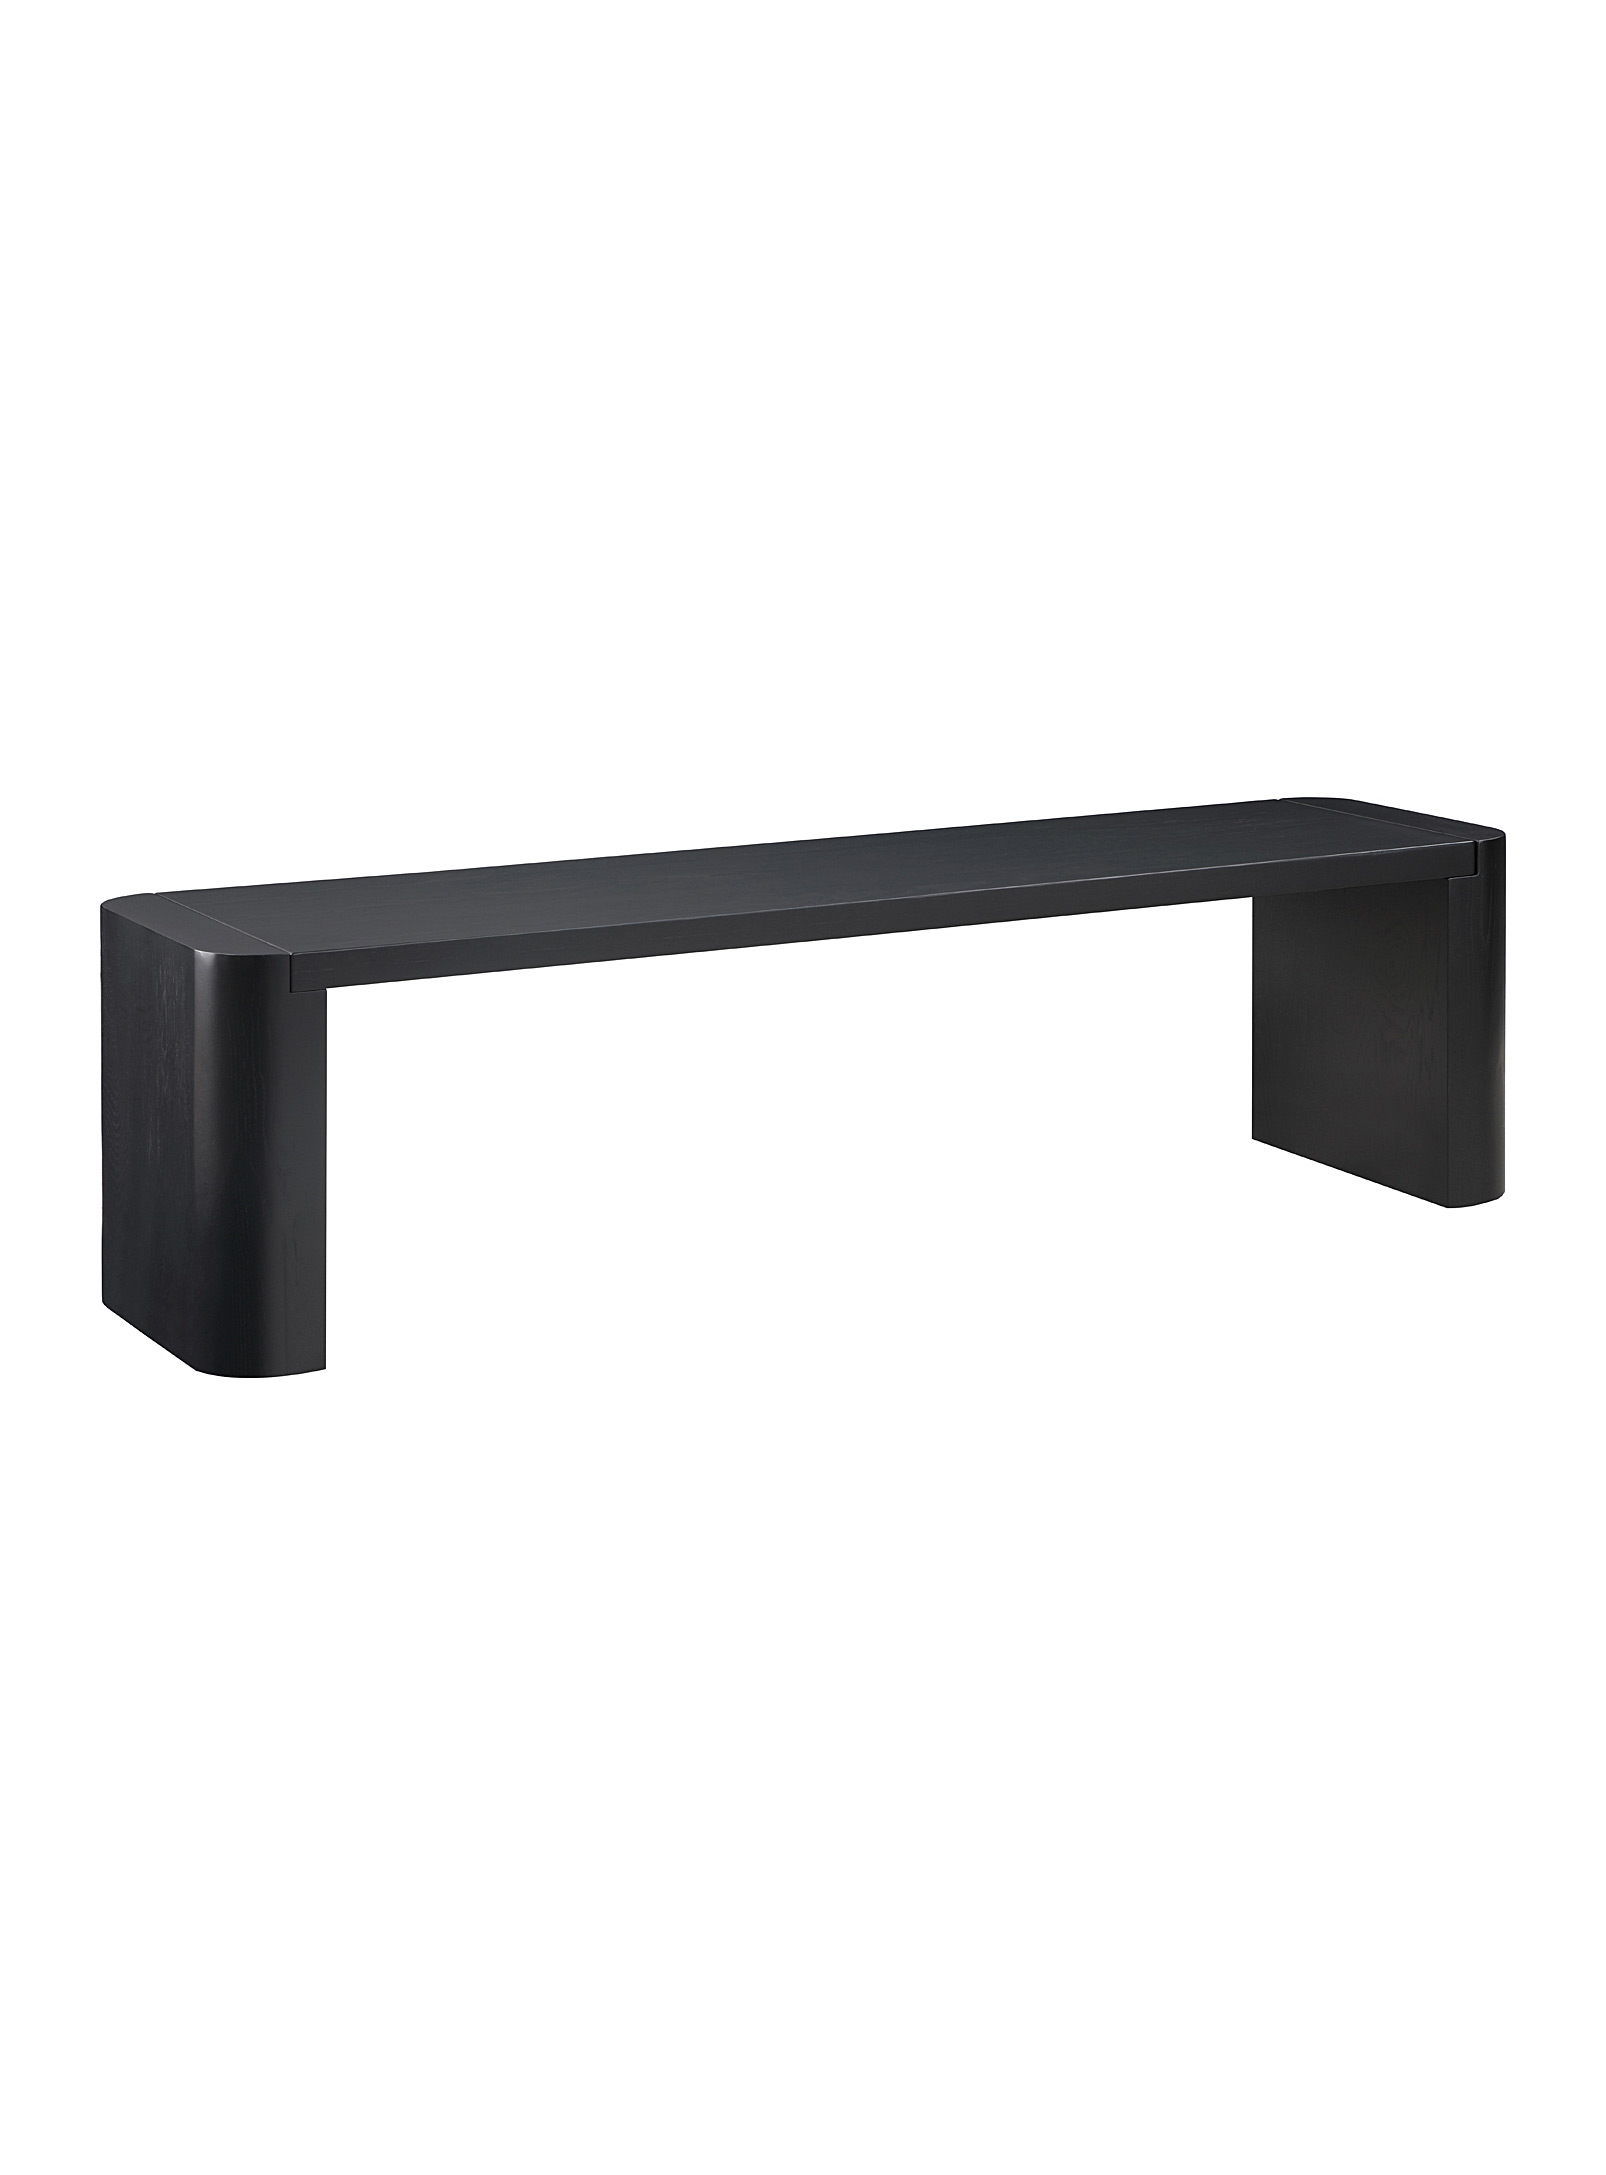 Moe's Home Collection - Post black oak wood bench